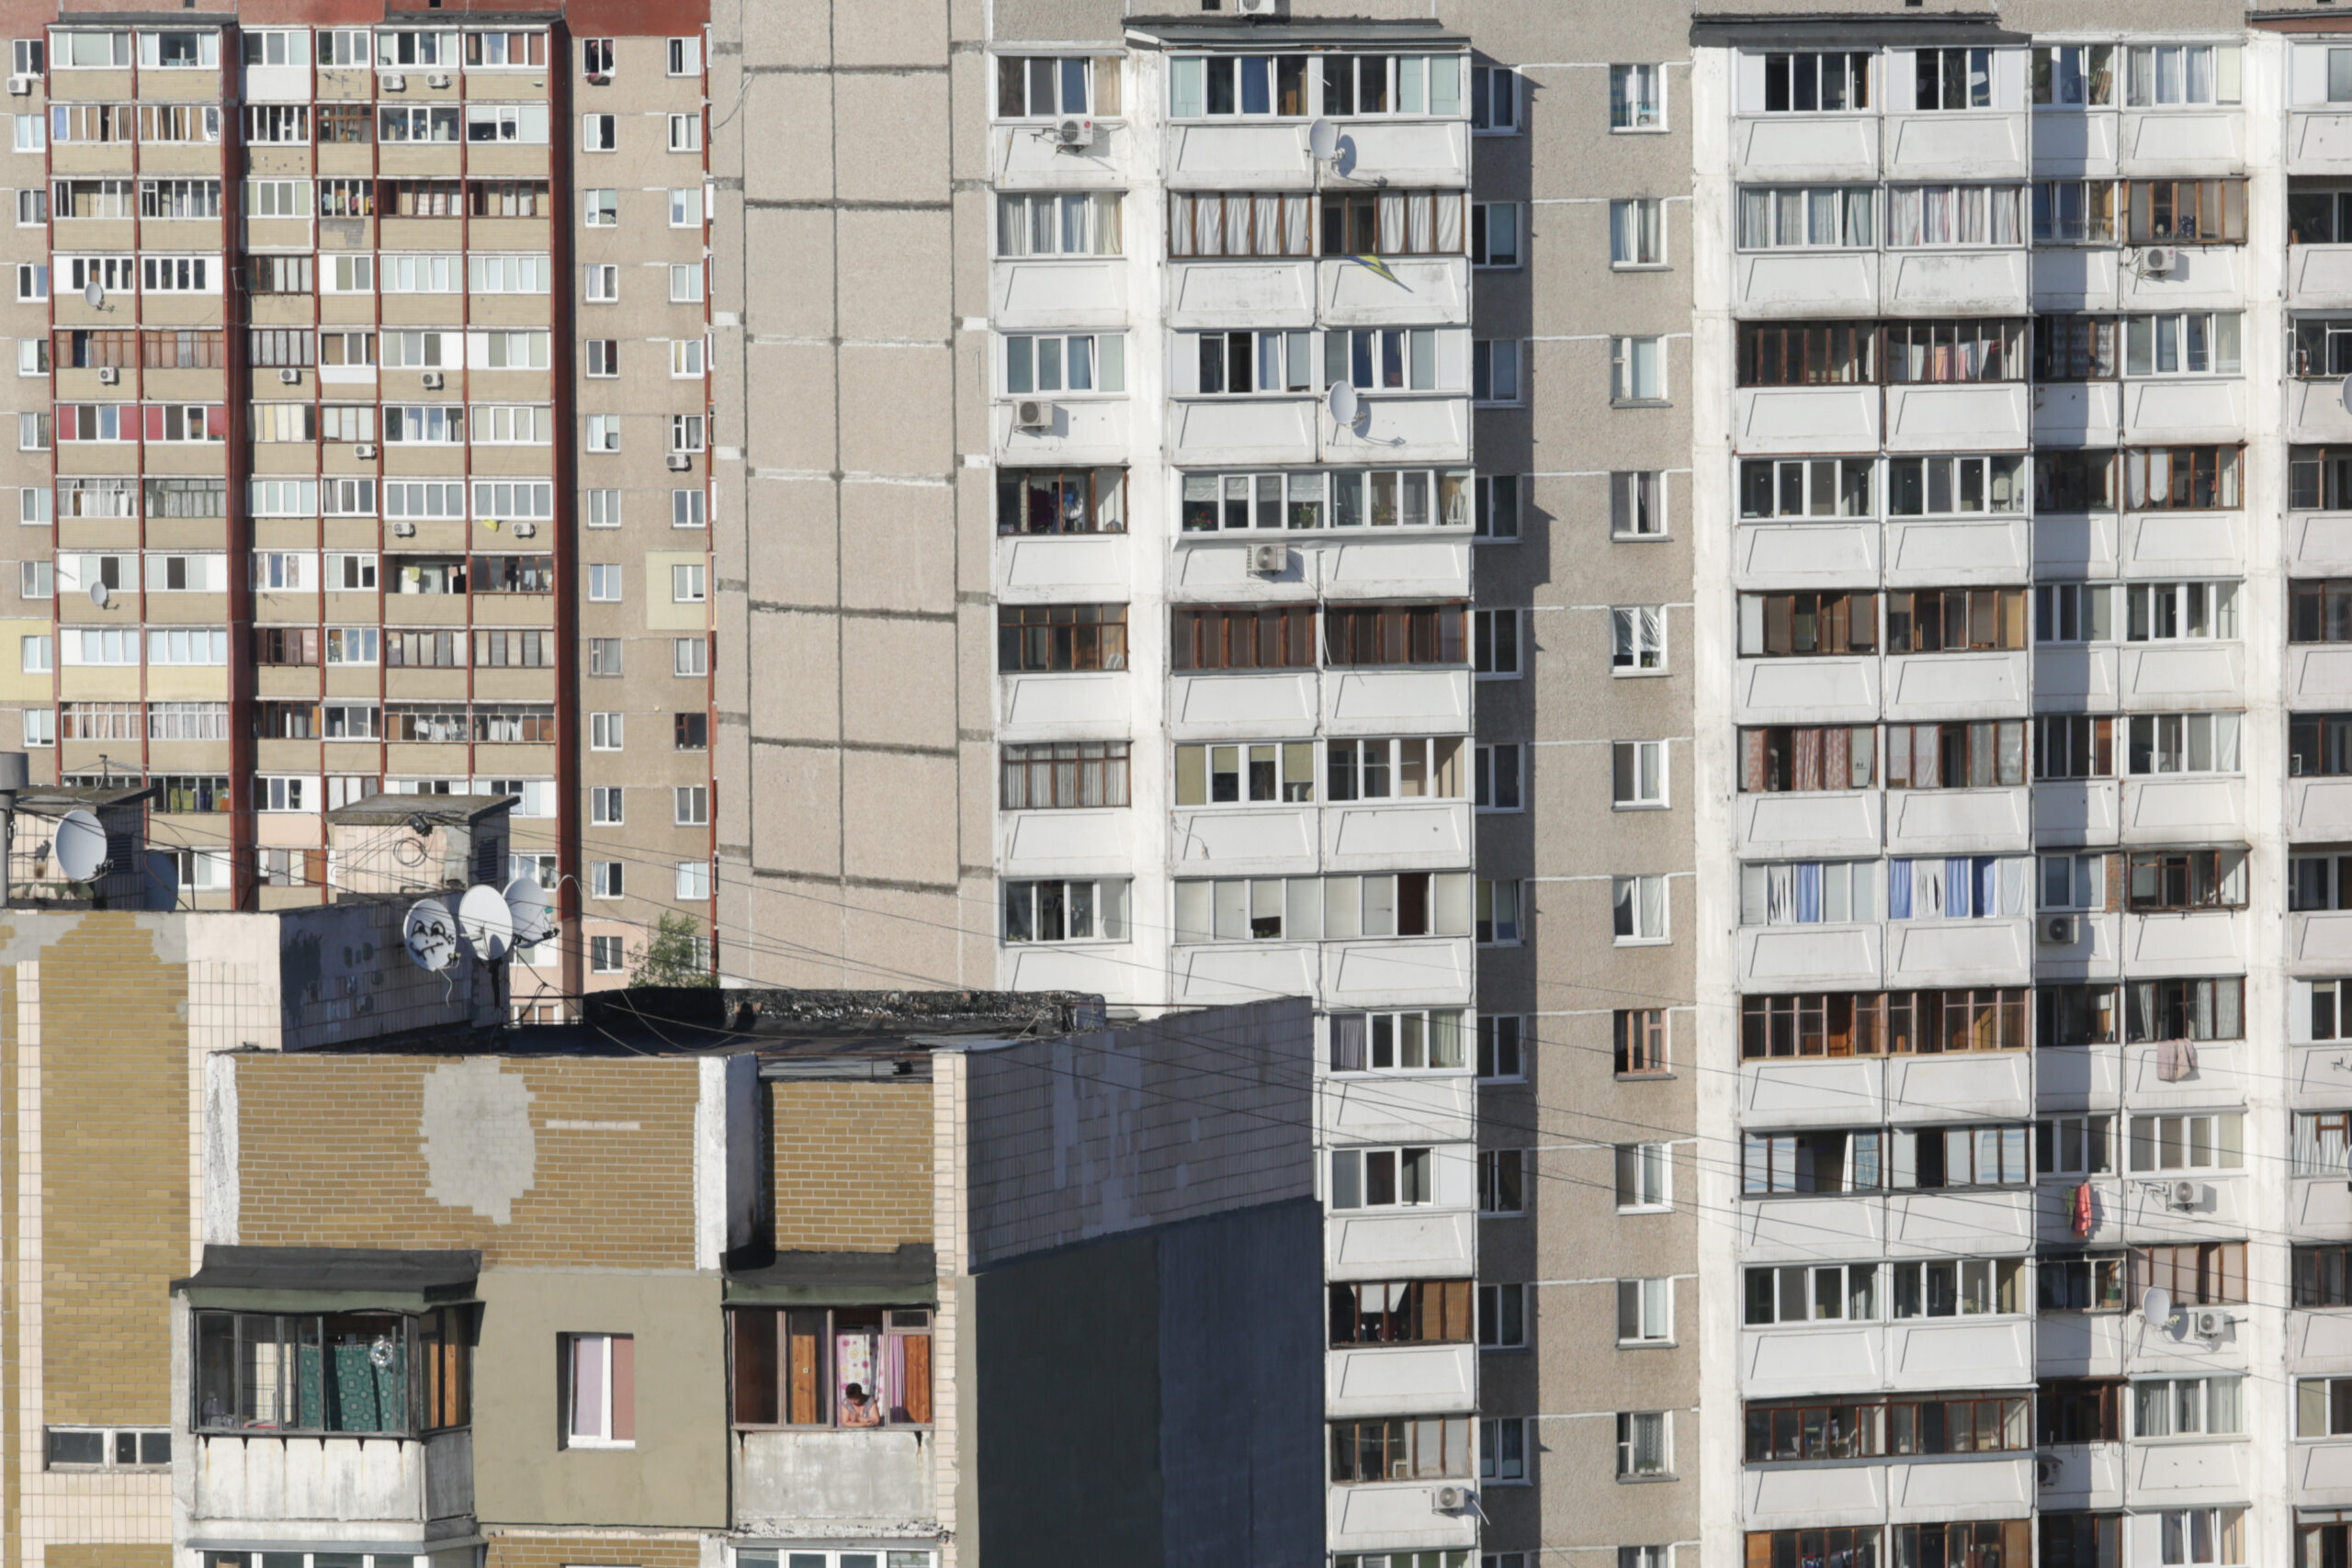 In Kyiv&#8217;s Troieshchyna neighborhood, hundreds of similarly designed apartment buildings stand alongside and behind one another, creating the illusion of an enormous unbreakable grey wall.